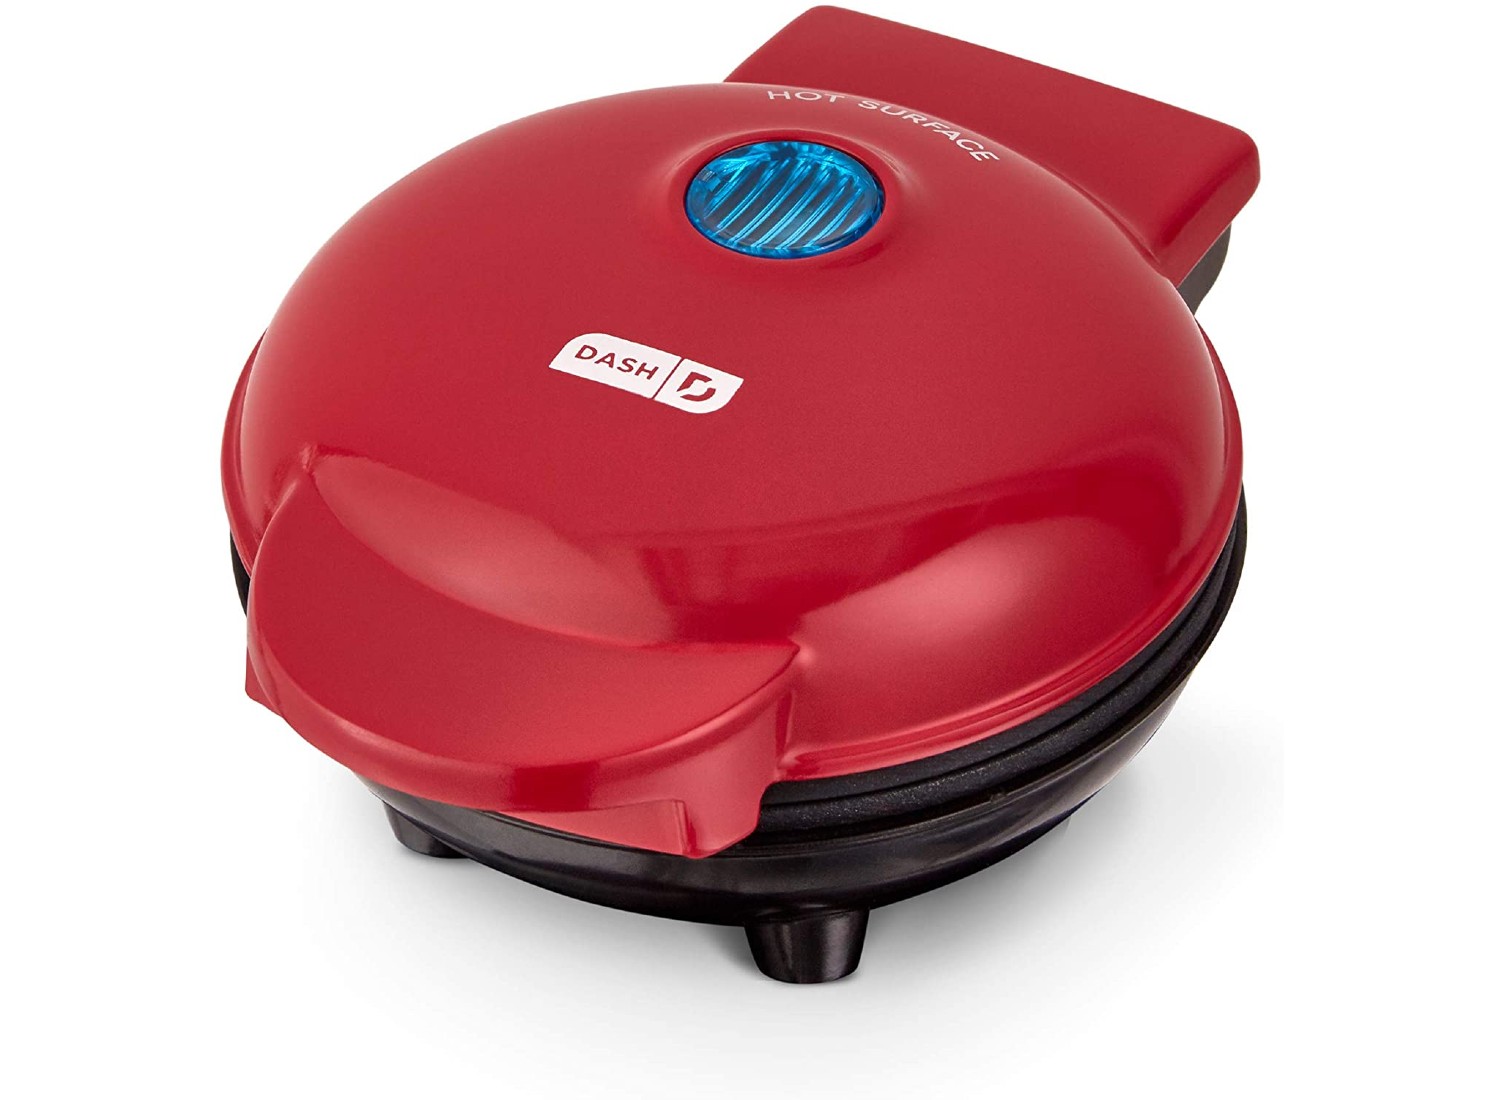 Kitchen gadgets review: sandwich maker – the Egg McNuffin